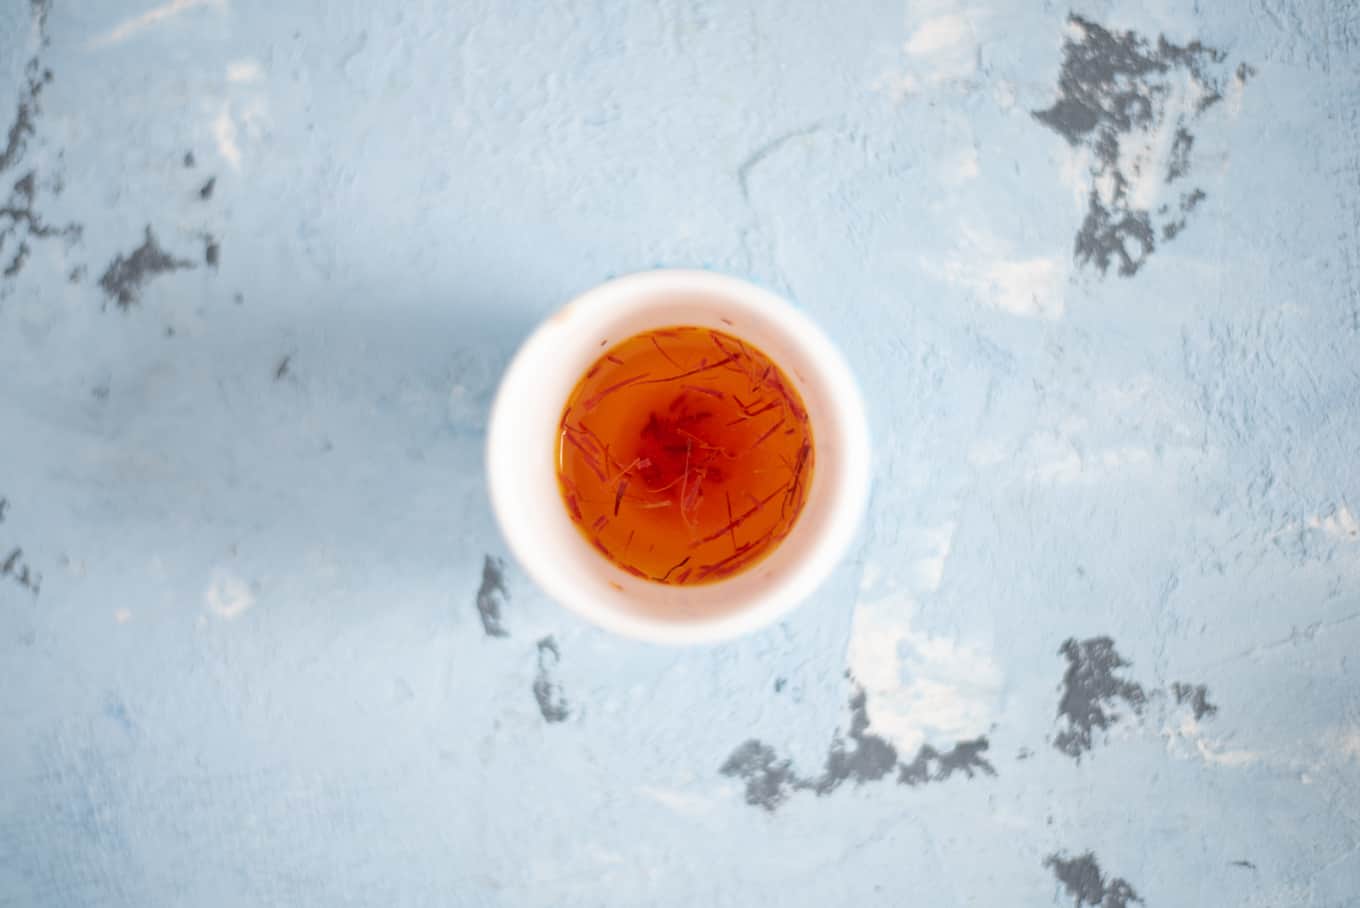 A small bowl of saffron in water.